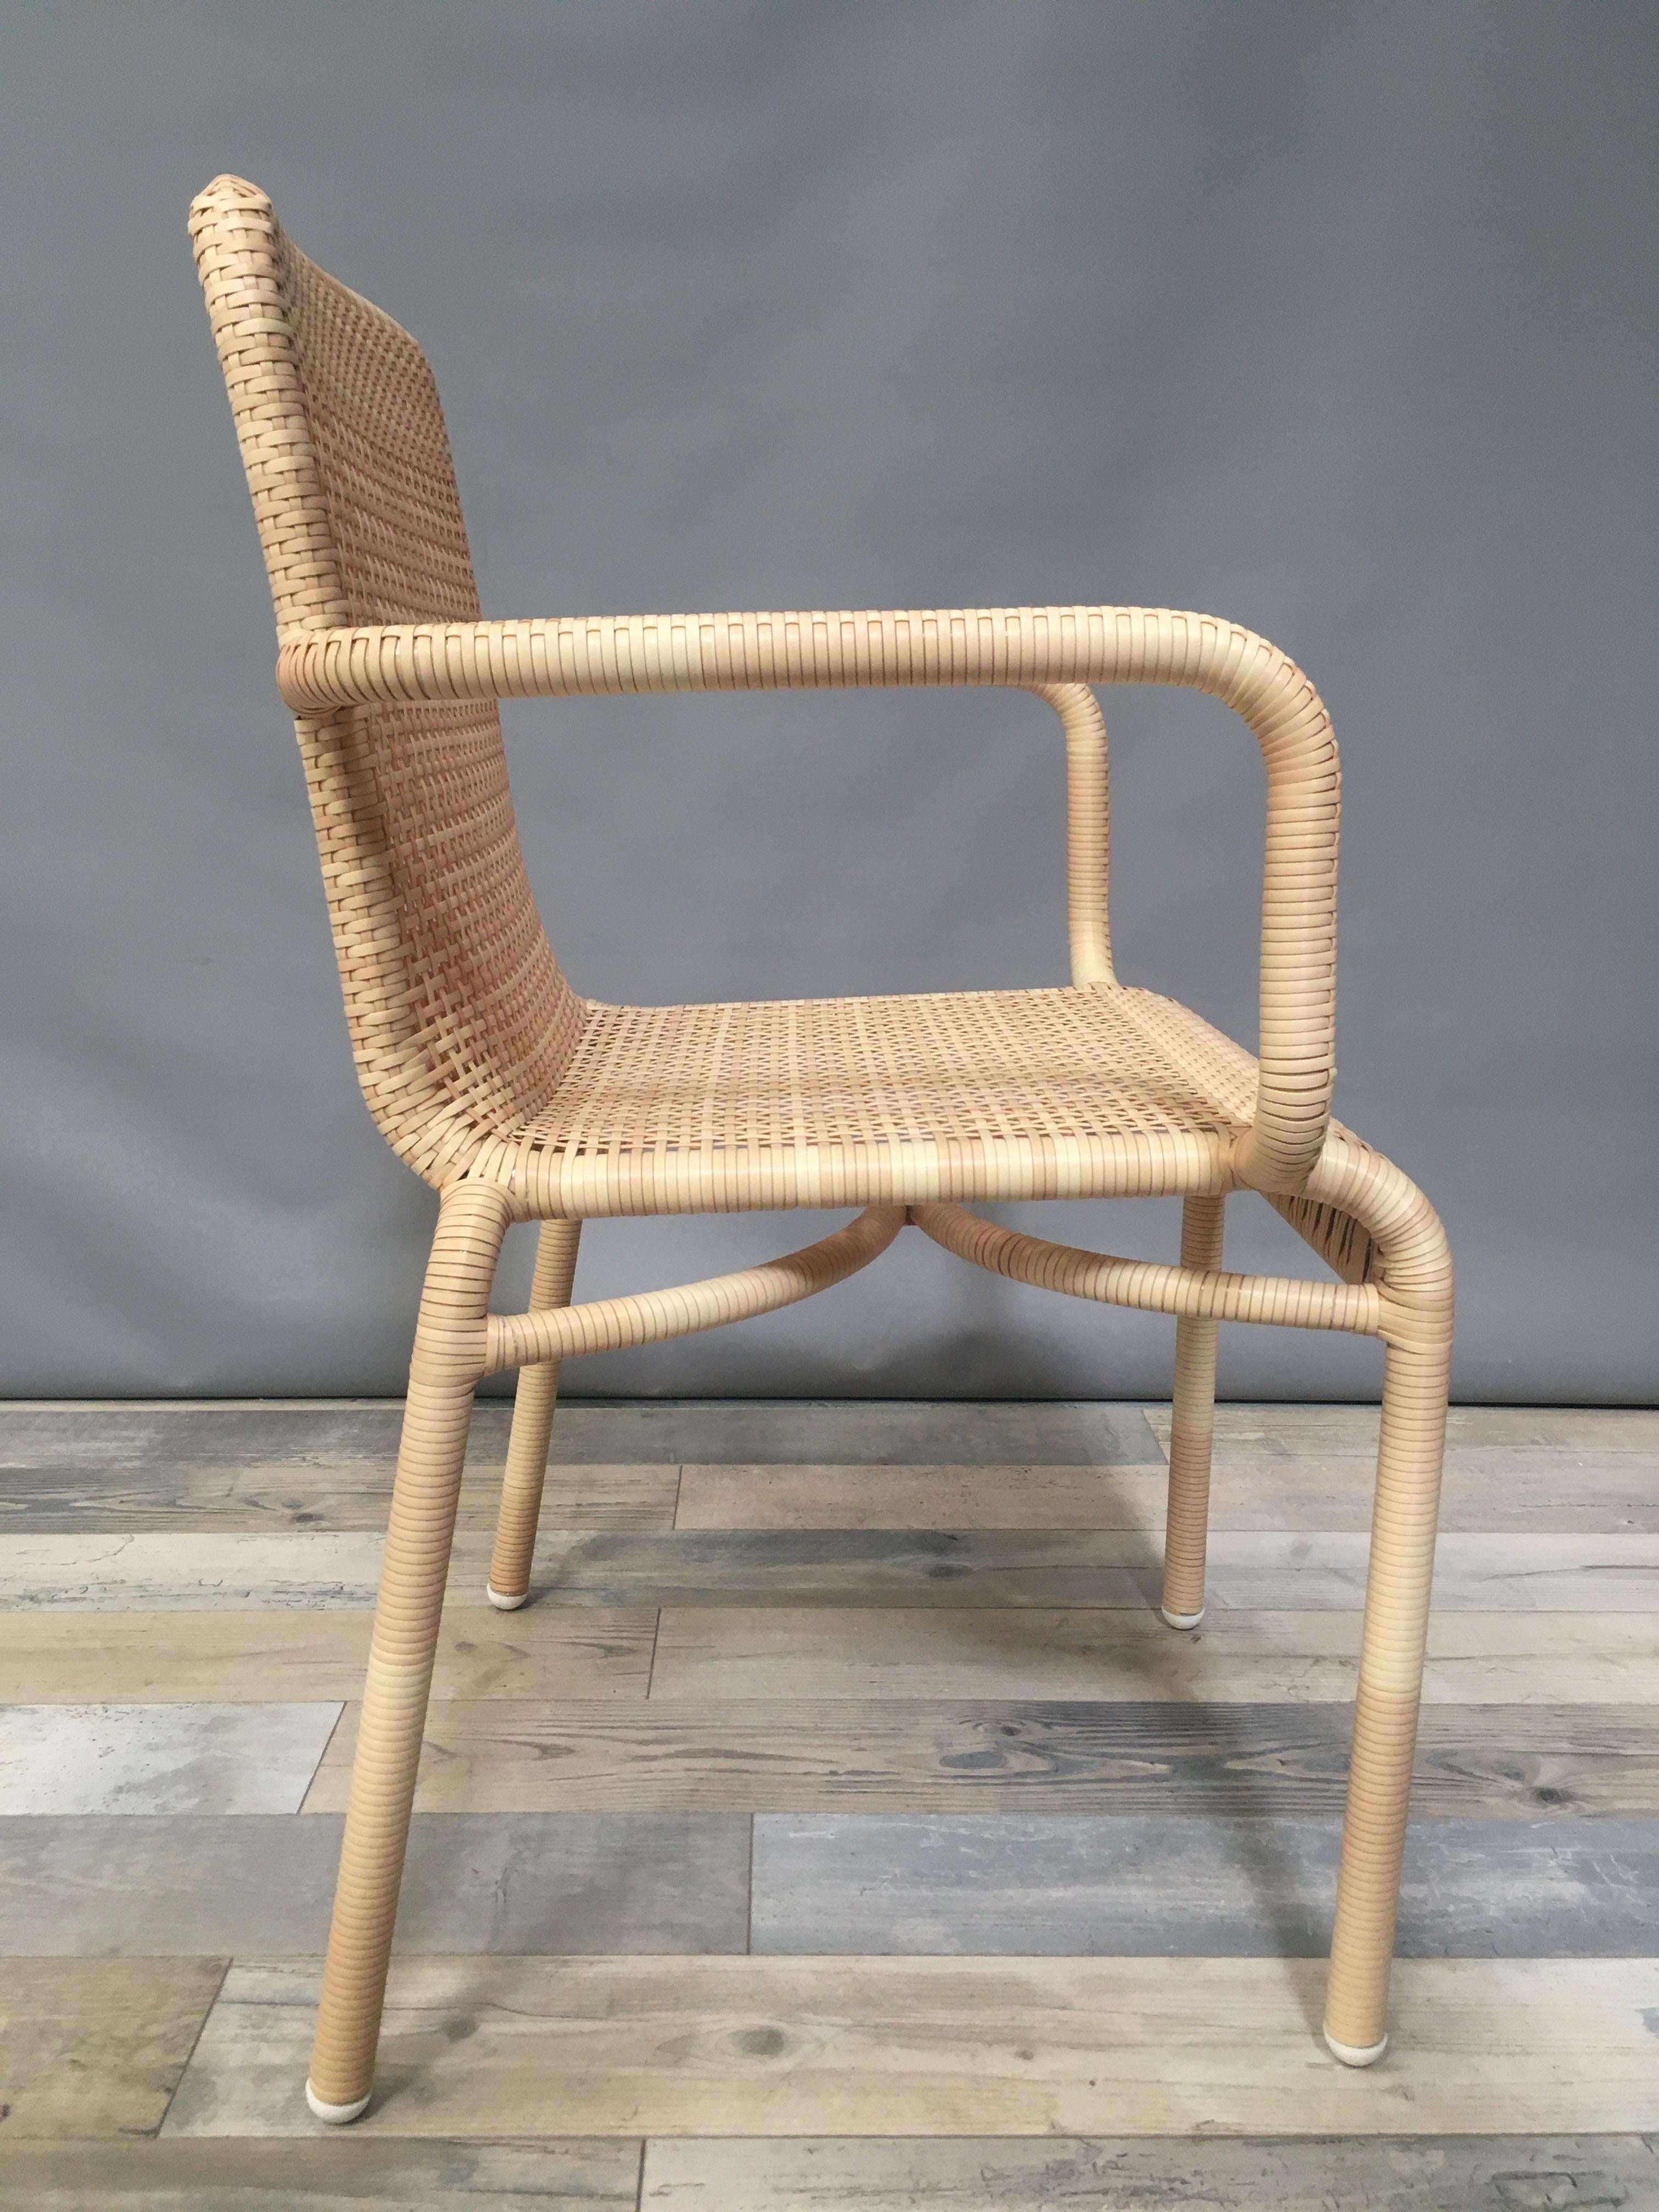 French Design and Braided Resin Rattan Effect Outdoor Chair For Sale 1